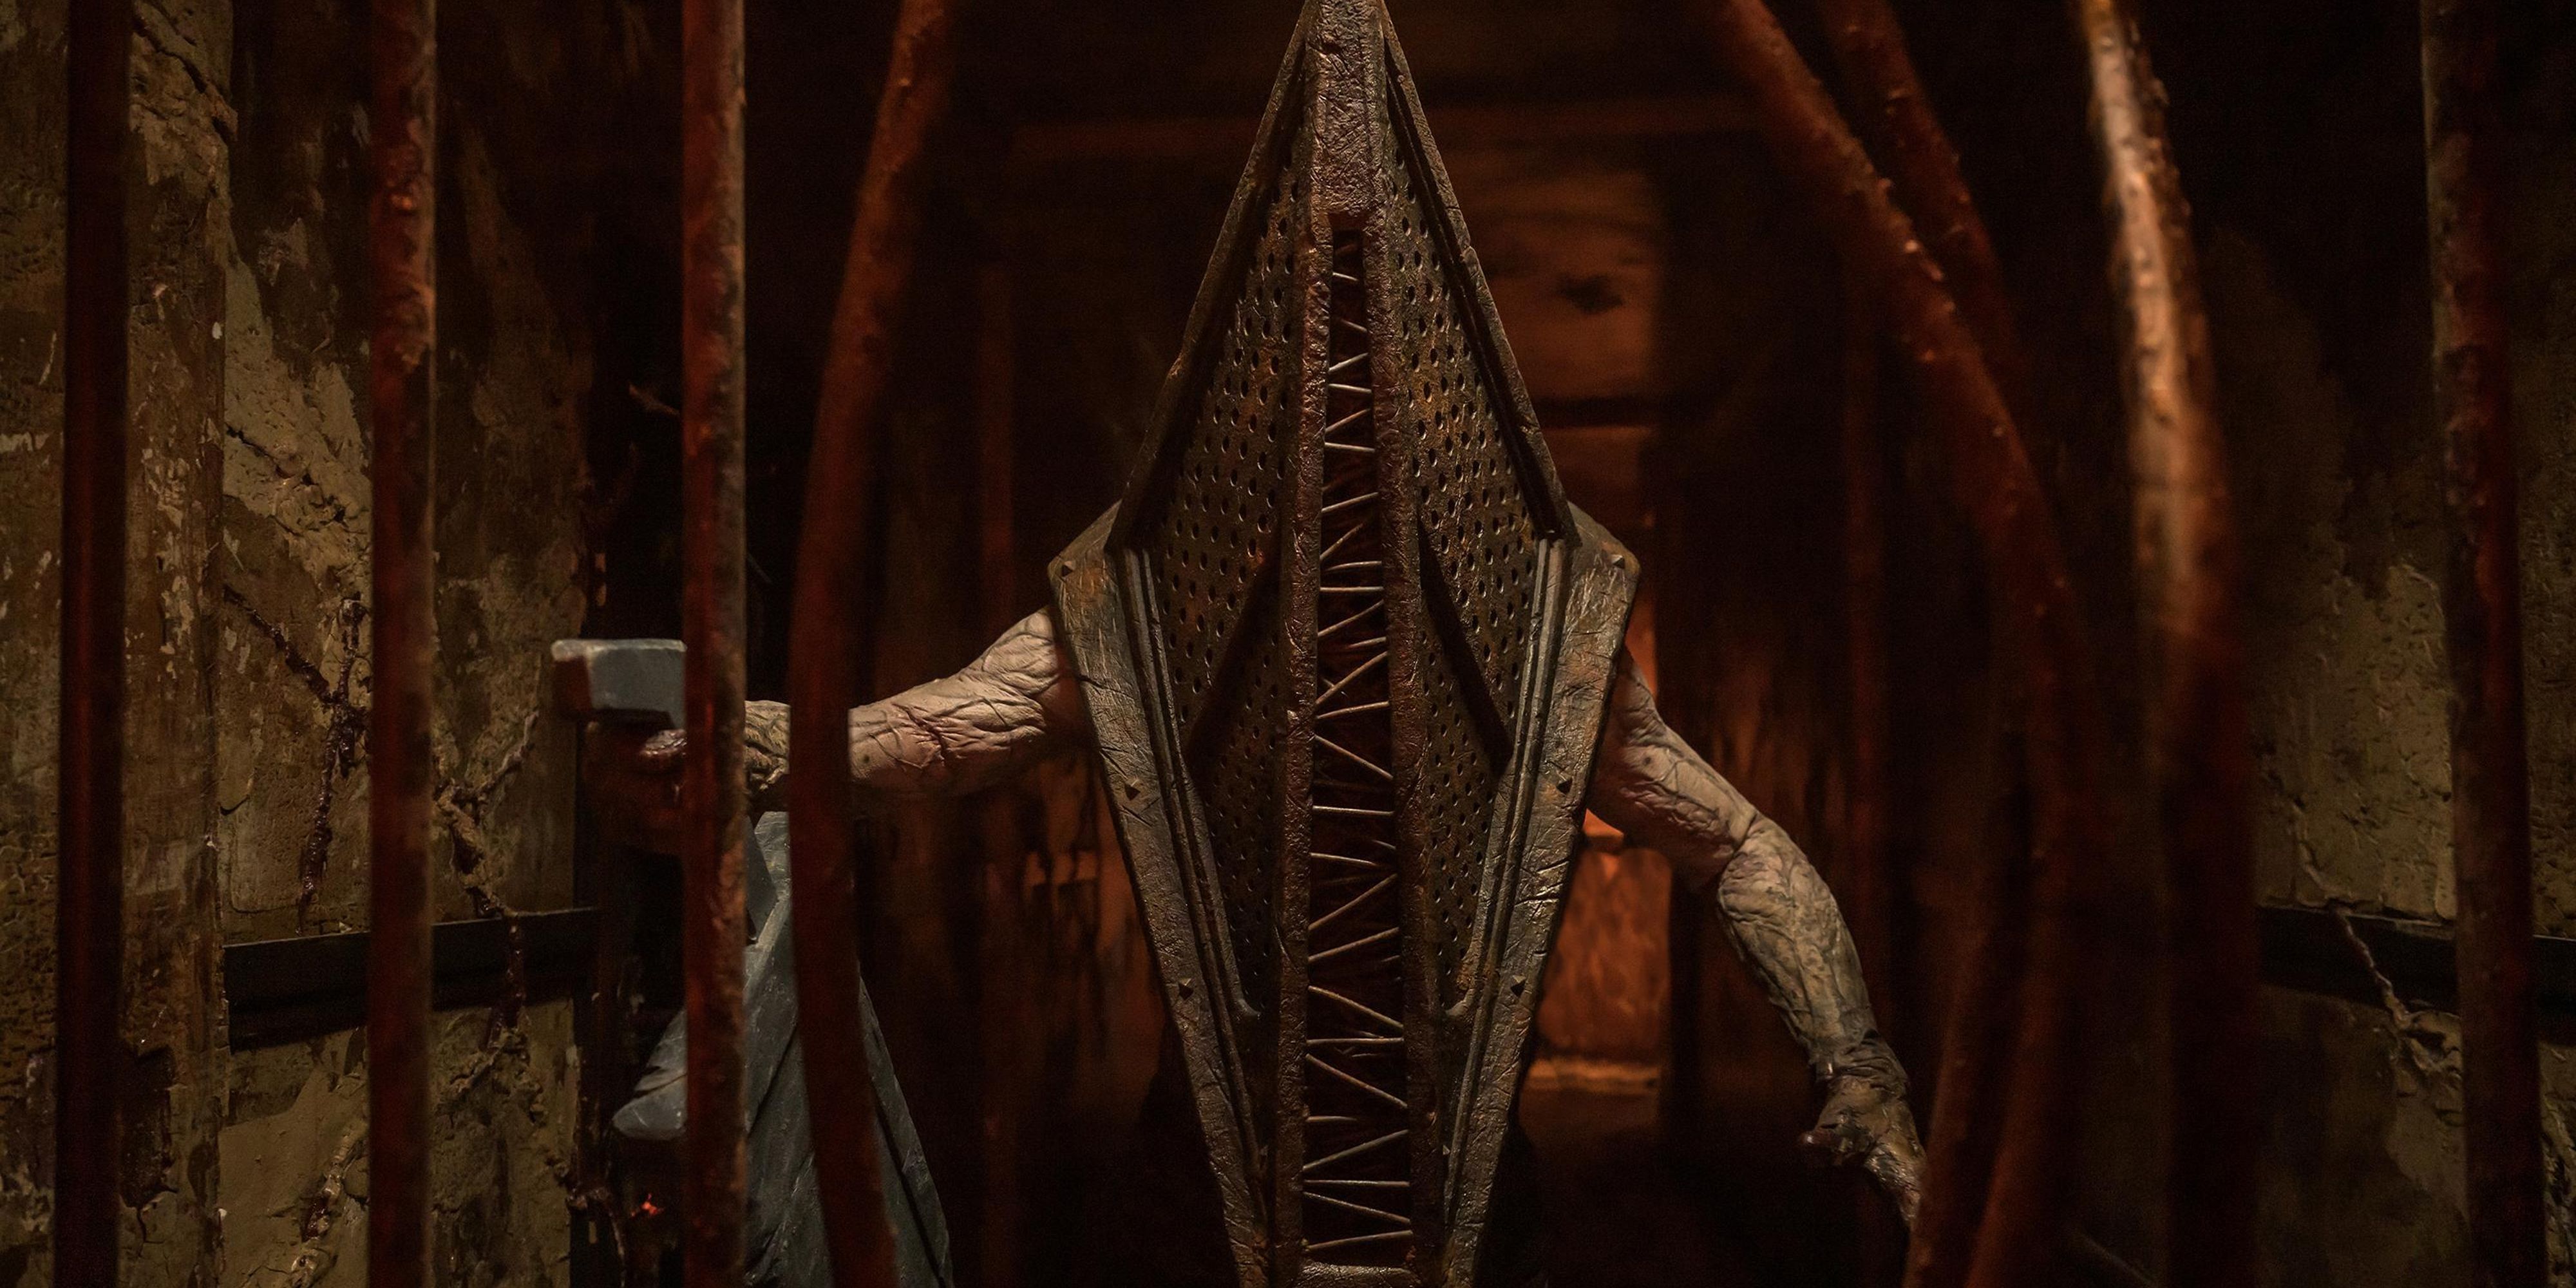 Return To Silent Hill Reveals First Look At Pyramid Head